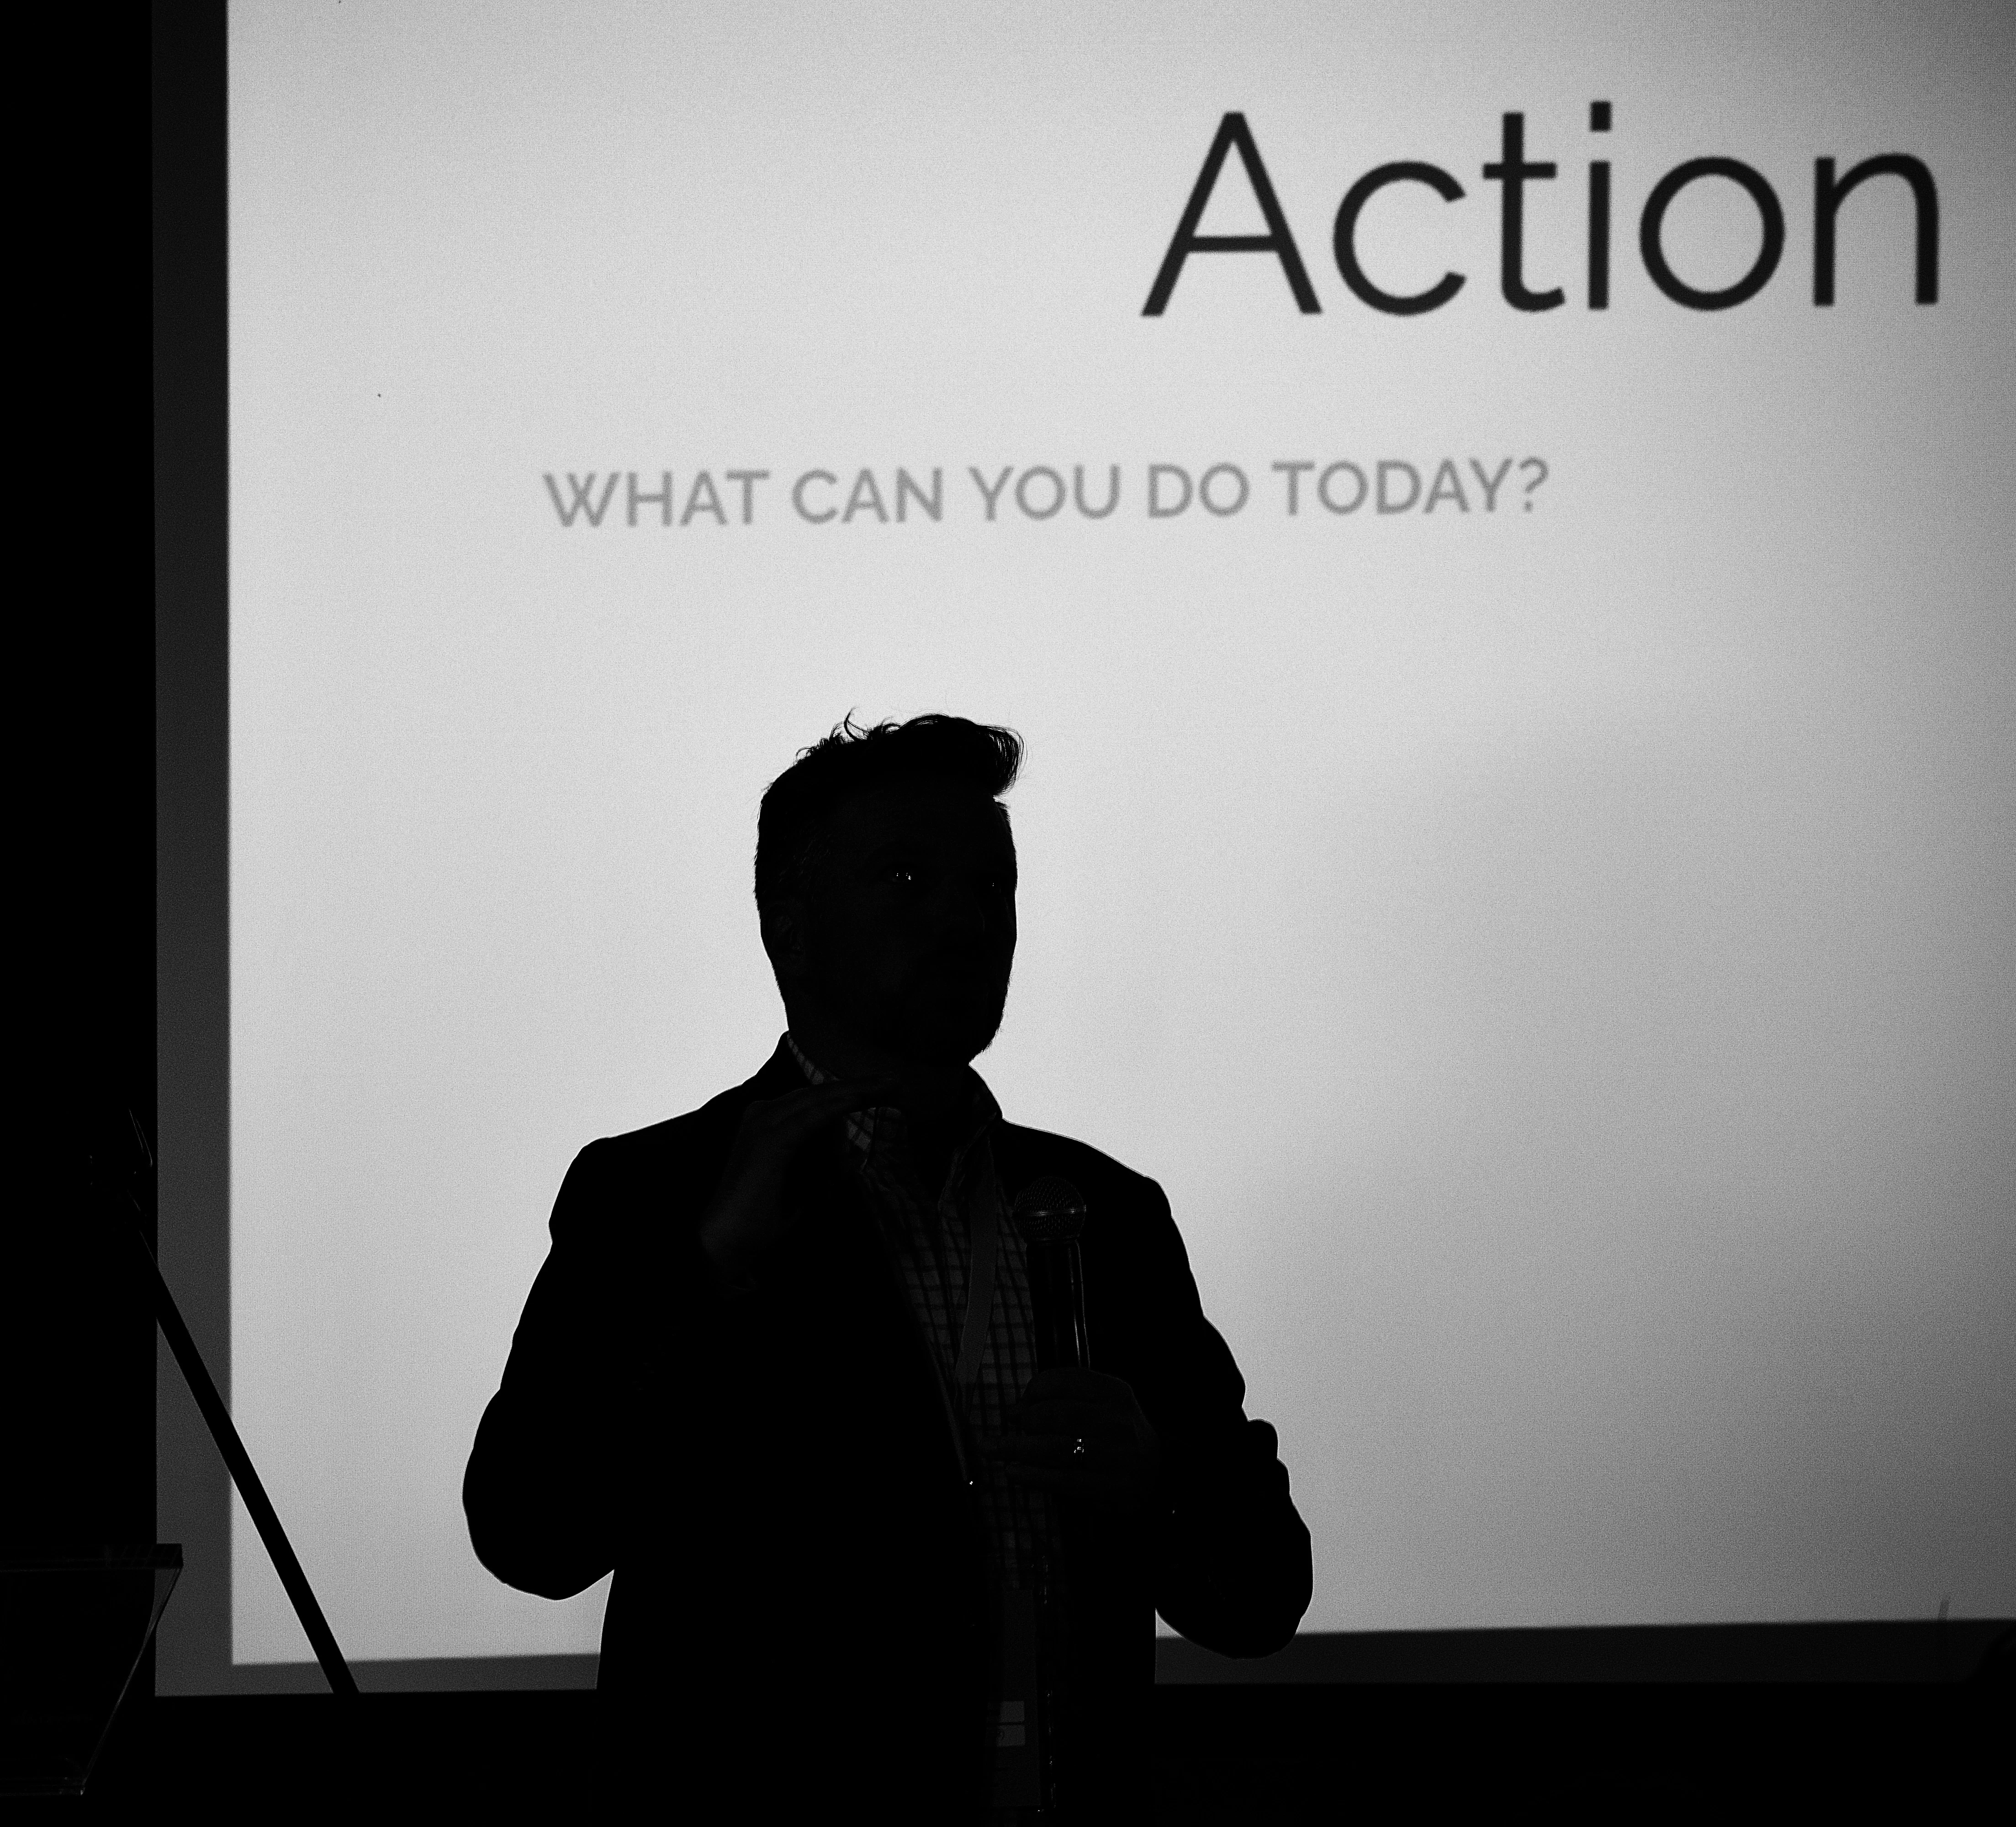 Ken Higgins silhouettes against his screen, which says "Action: What can you do today?"